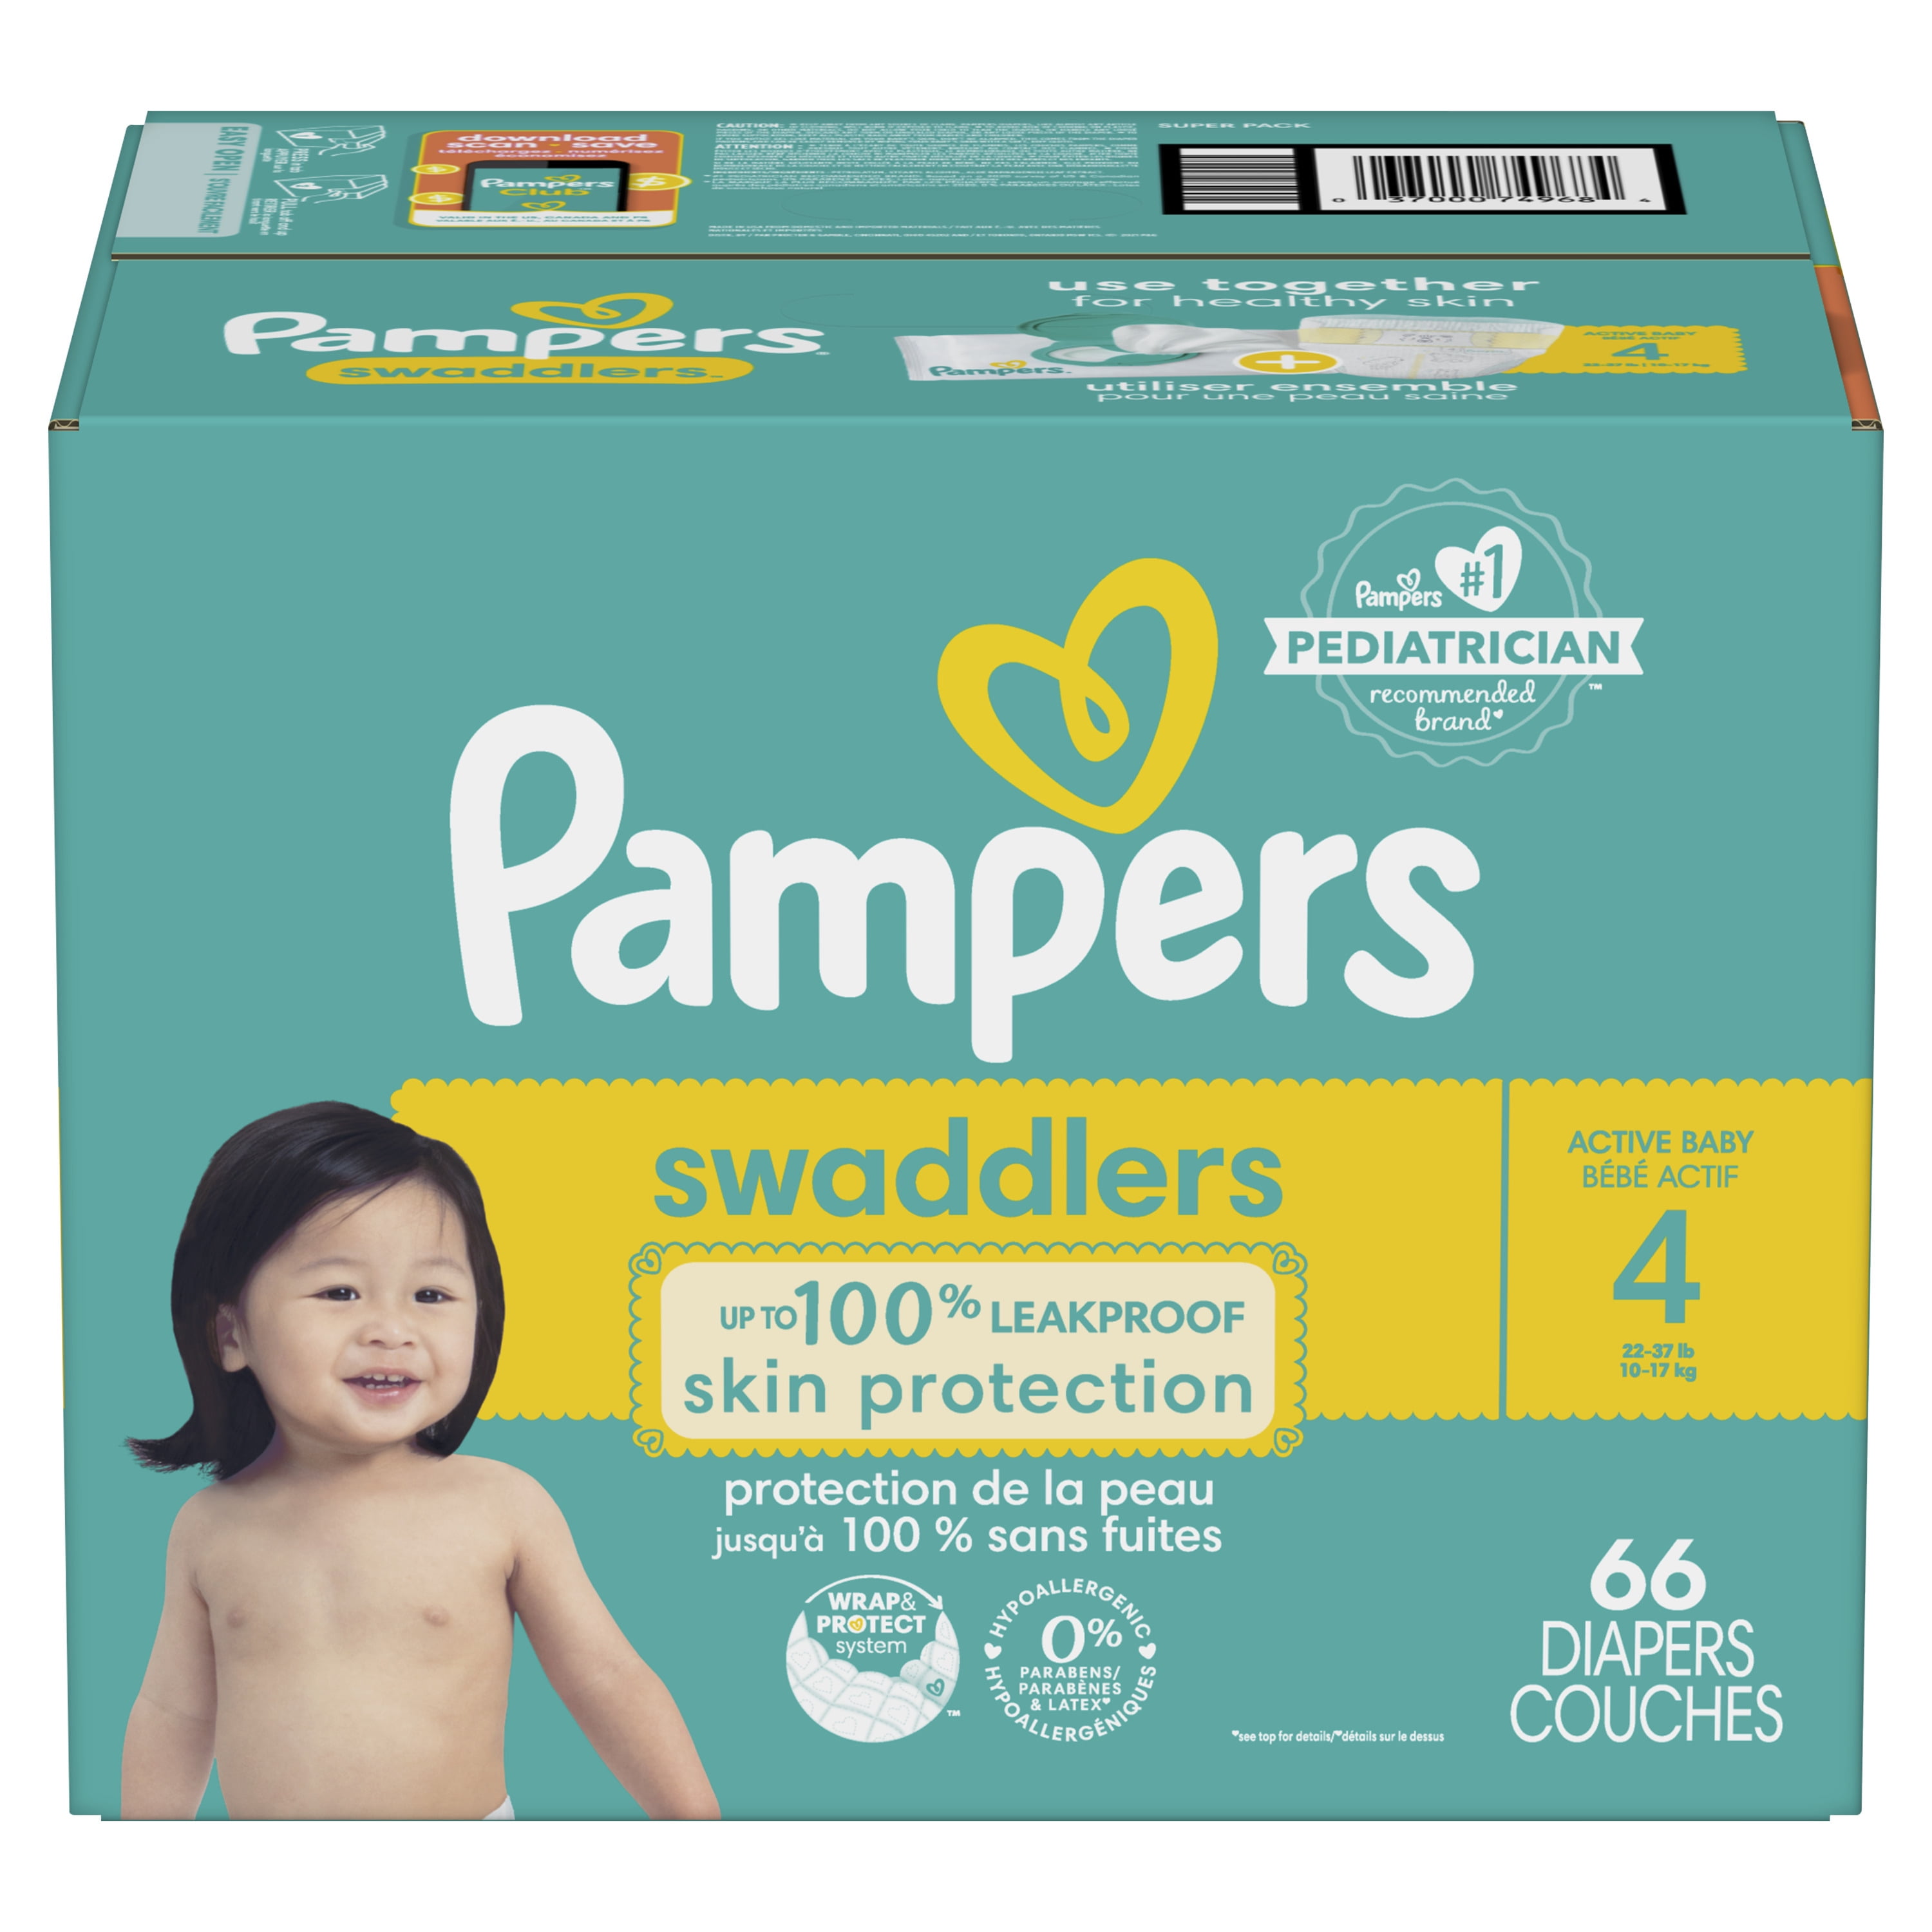 Pampers Swaddlers Diapers (Choose Your Size & Count) - 2